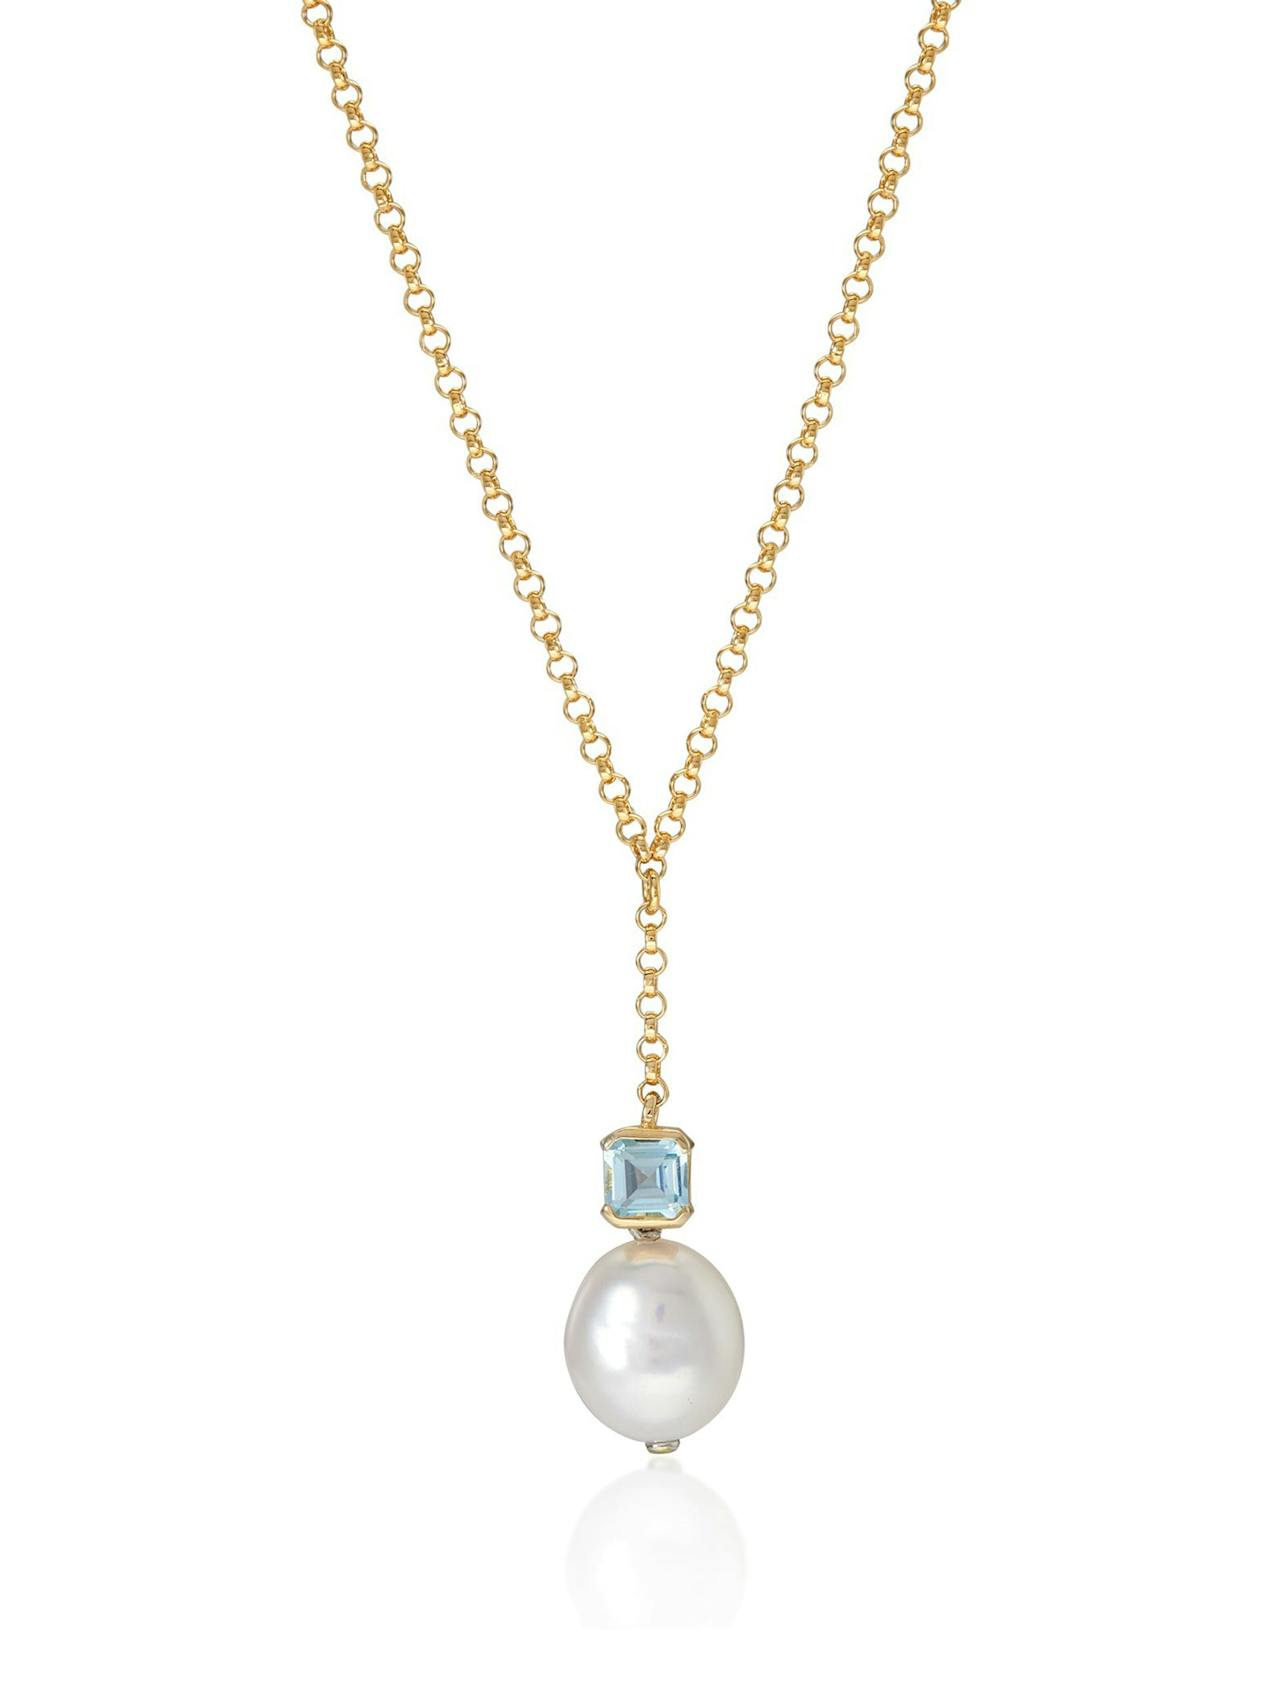 Bella baroque pearl necklace in gold and blue topaz